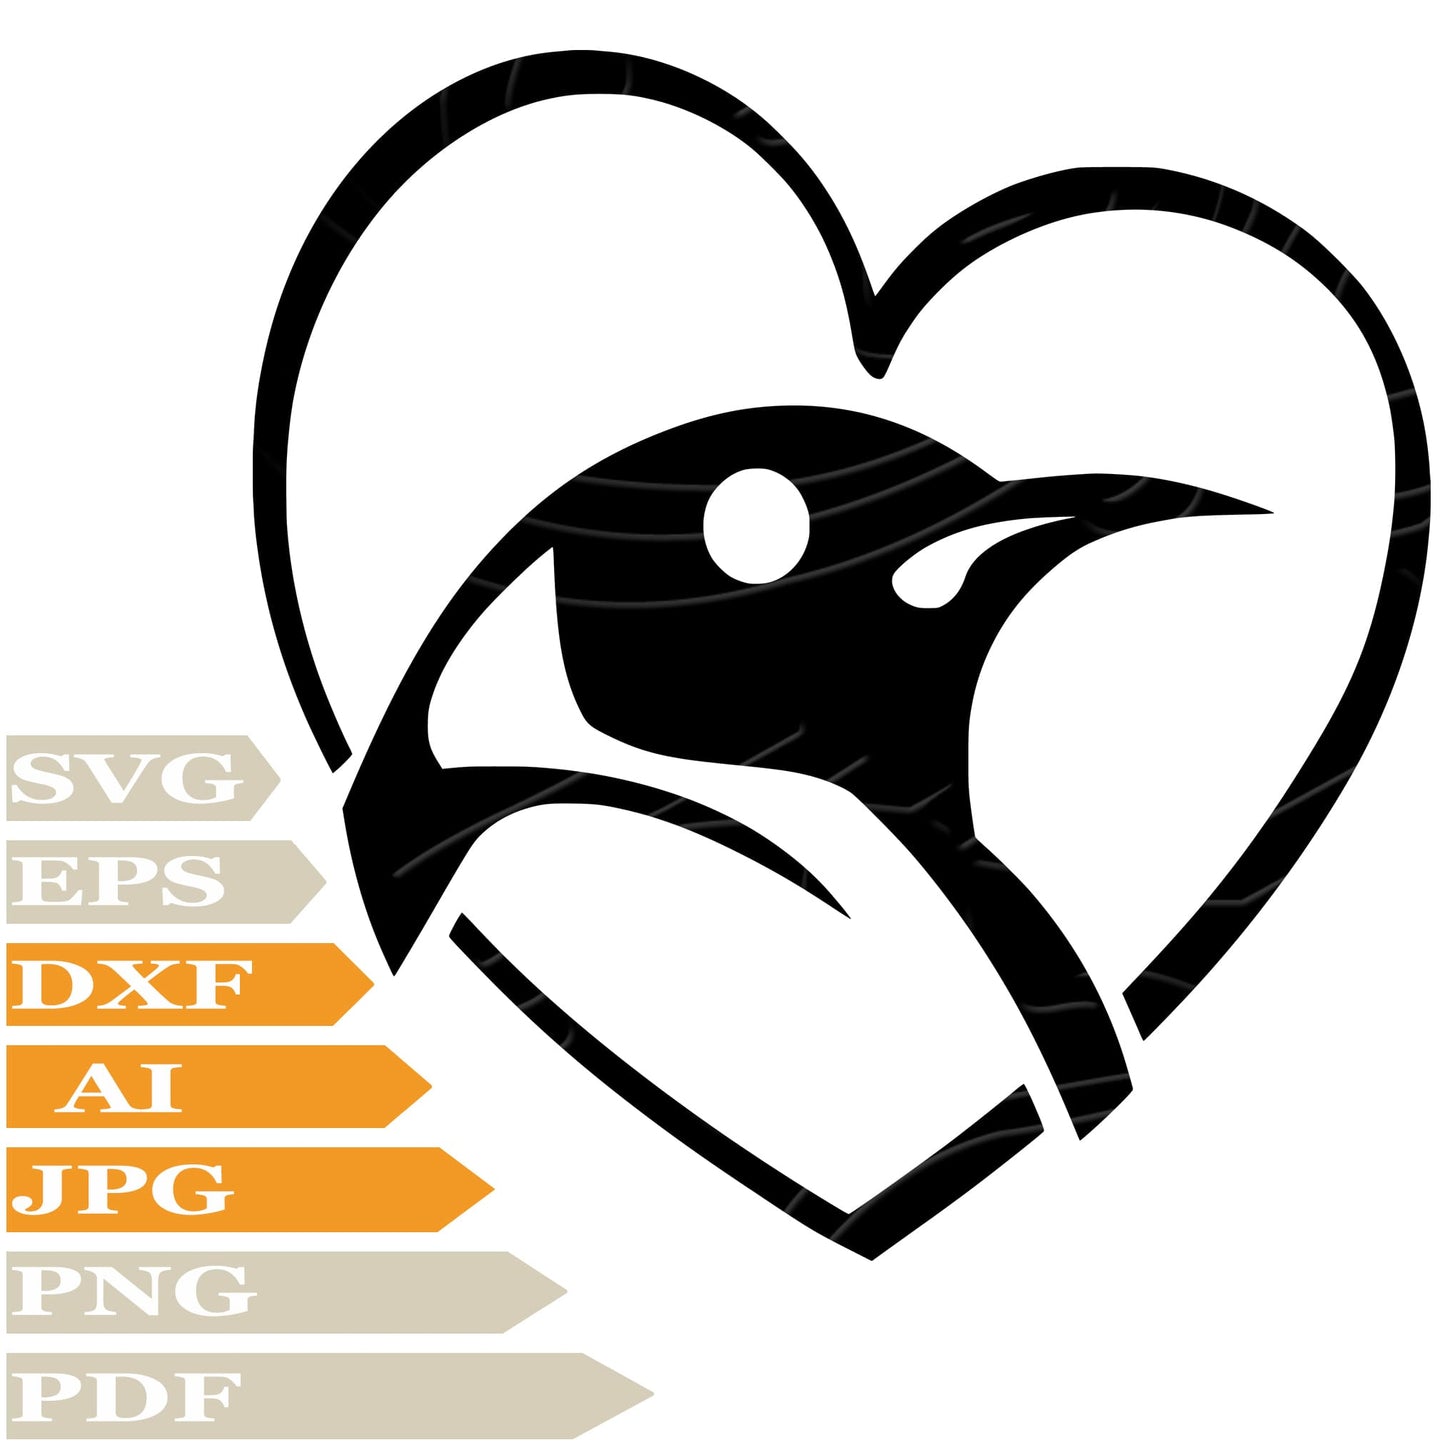 sofvintage-This Penguin SVG Is Perfect For All Your Crafting Needs. The Water Bird Penguin Design Features A Cute Penguin Inside Of A Heart, Making It A Great Addition To Any Valentine's Day Project. With Both A Cut File For Cricut And A PNG File, This Versatile Design Is Perfect For Creating T-Shirts, Wall Stickers, Or Even Tattoos.